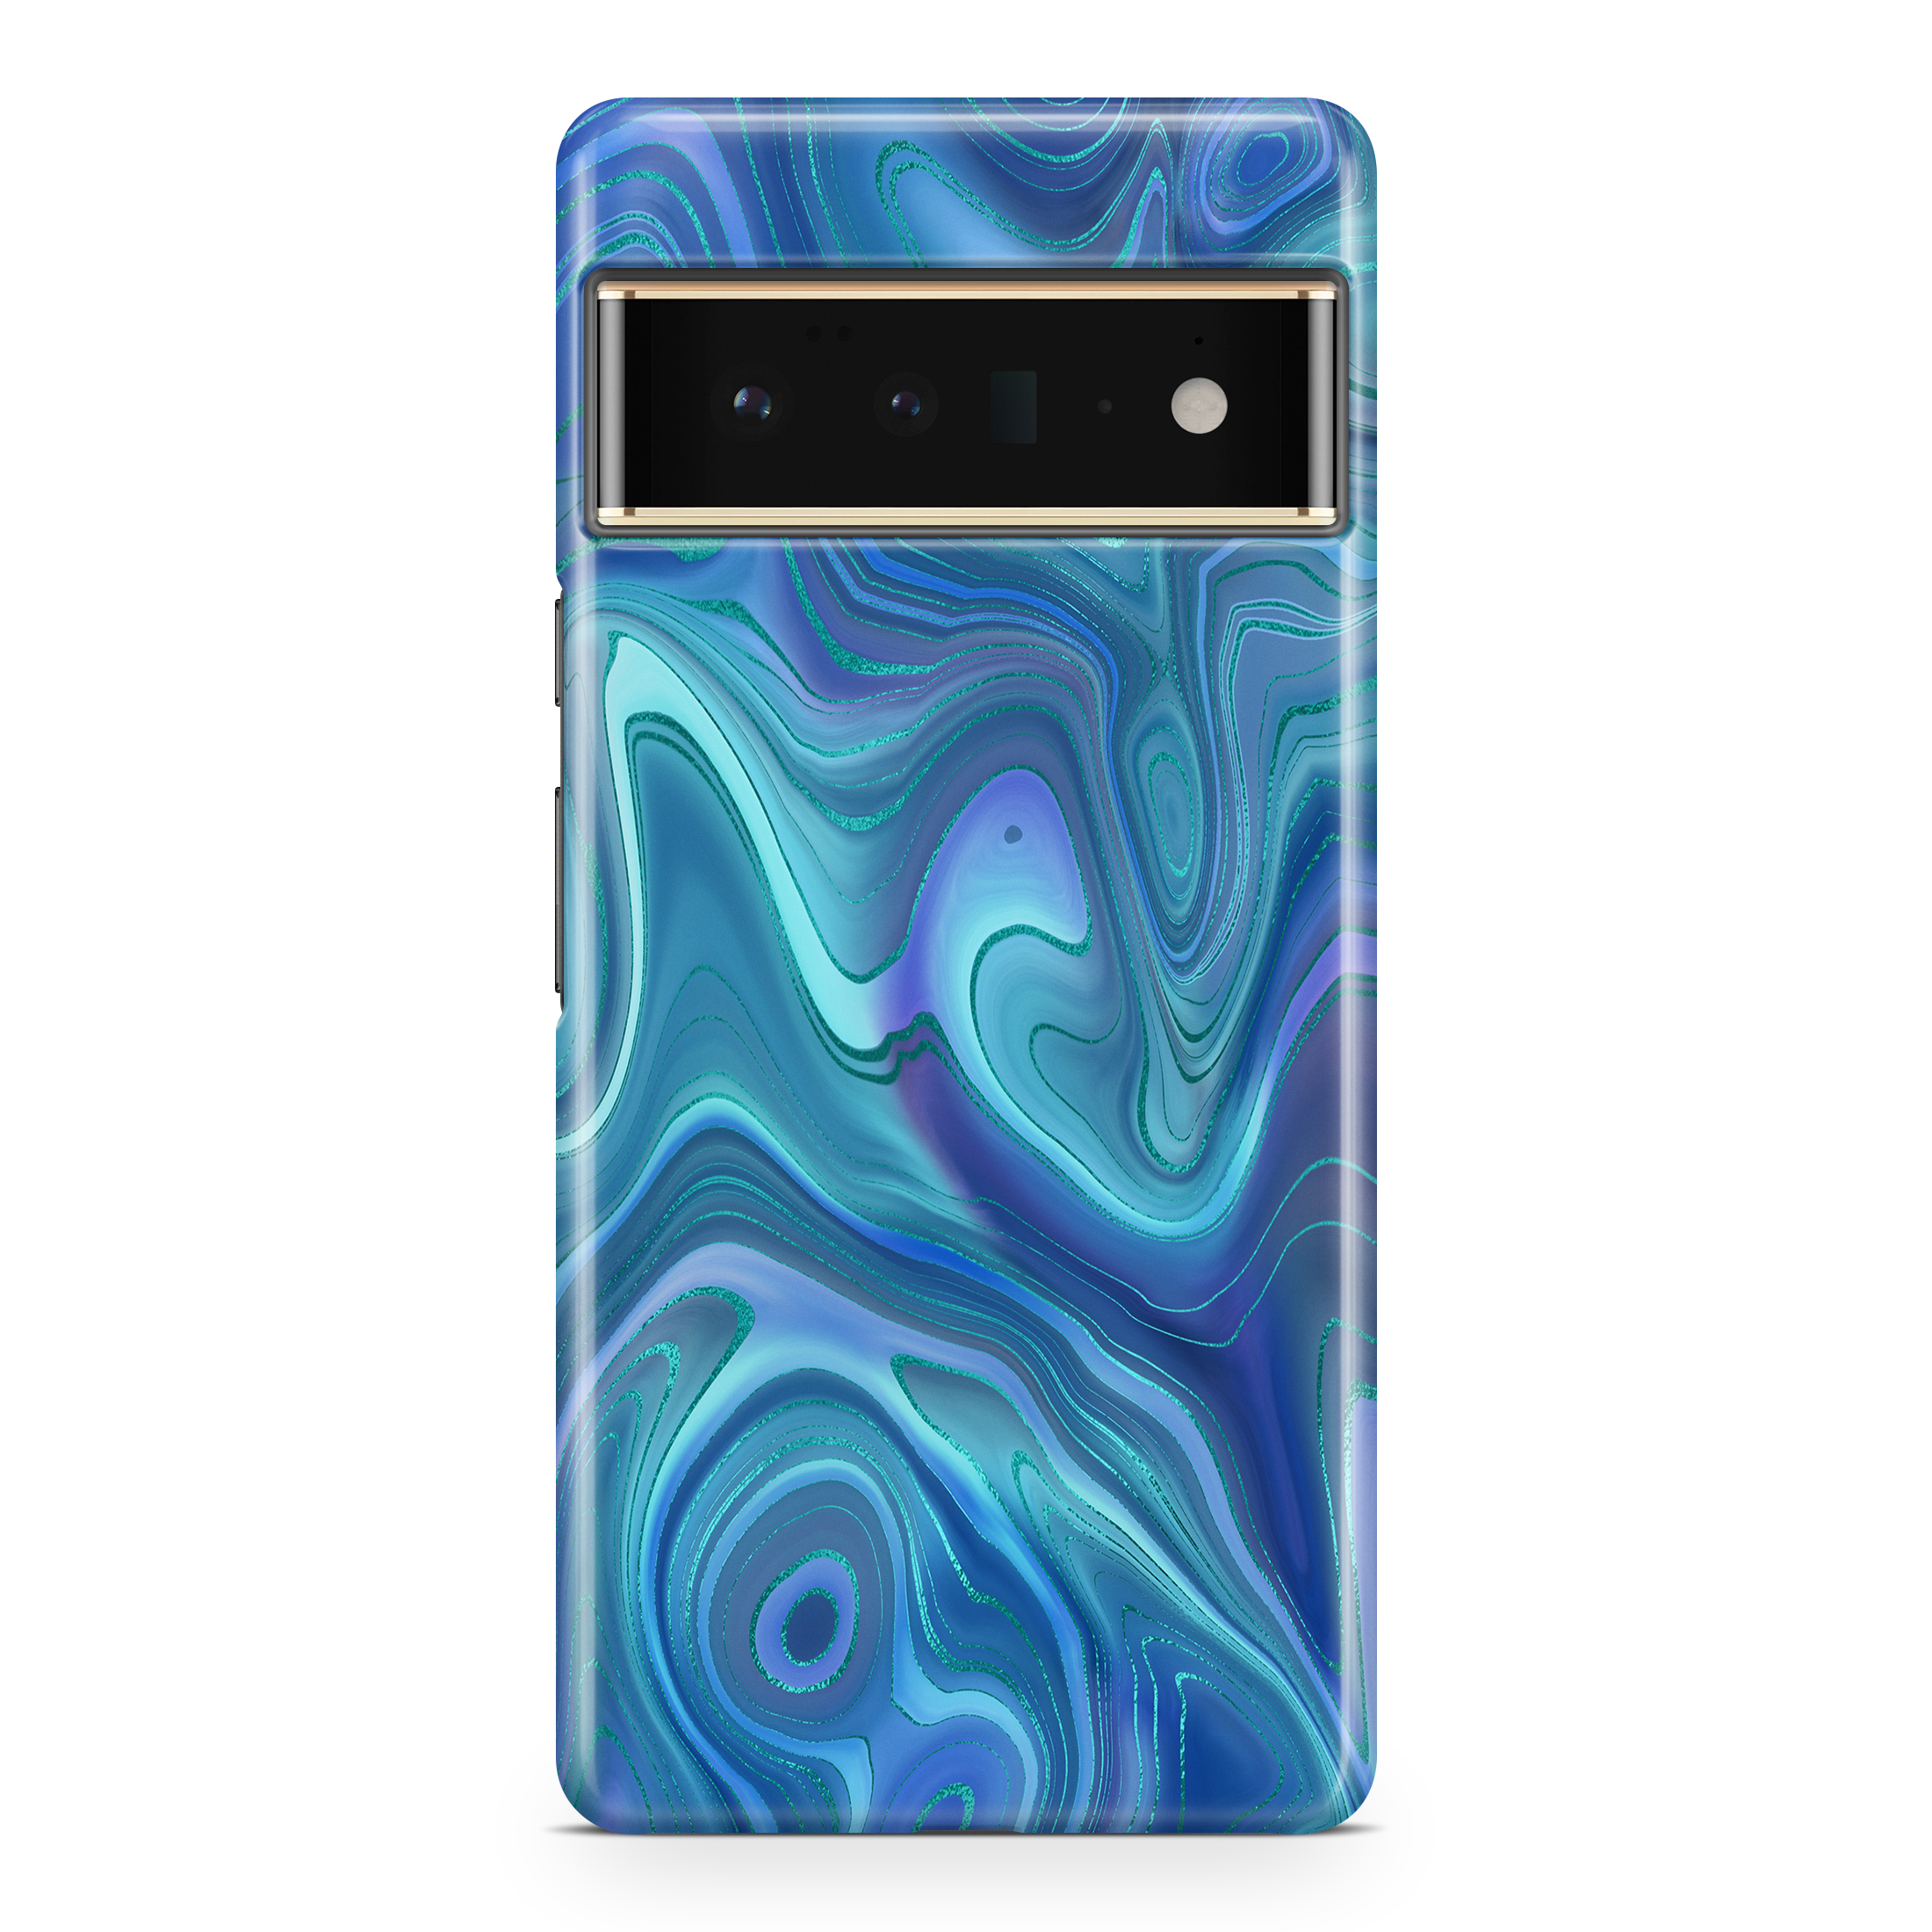 Ocean Strata - Google phone case designs by CaseSwagger